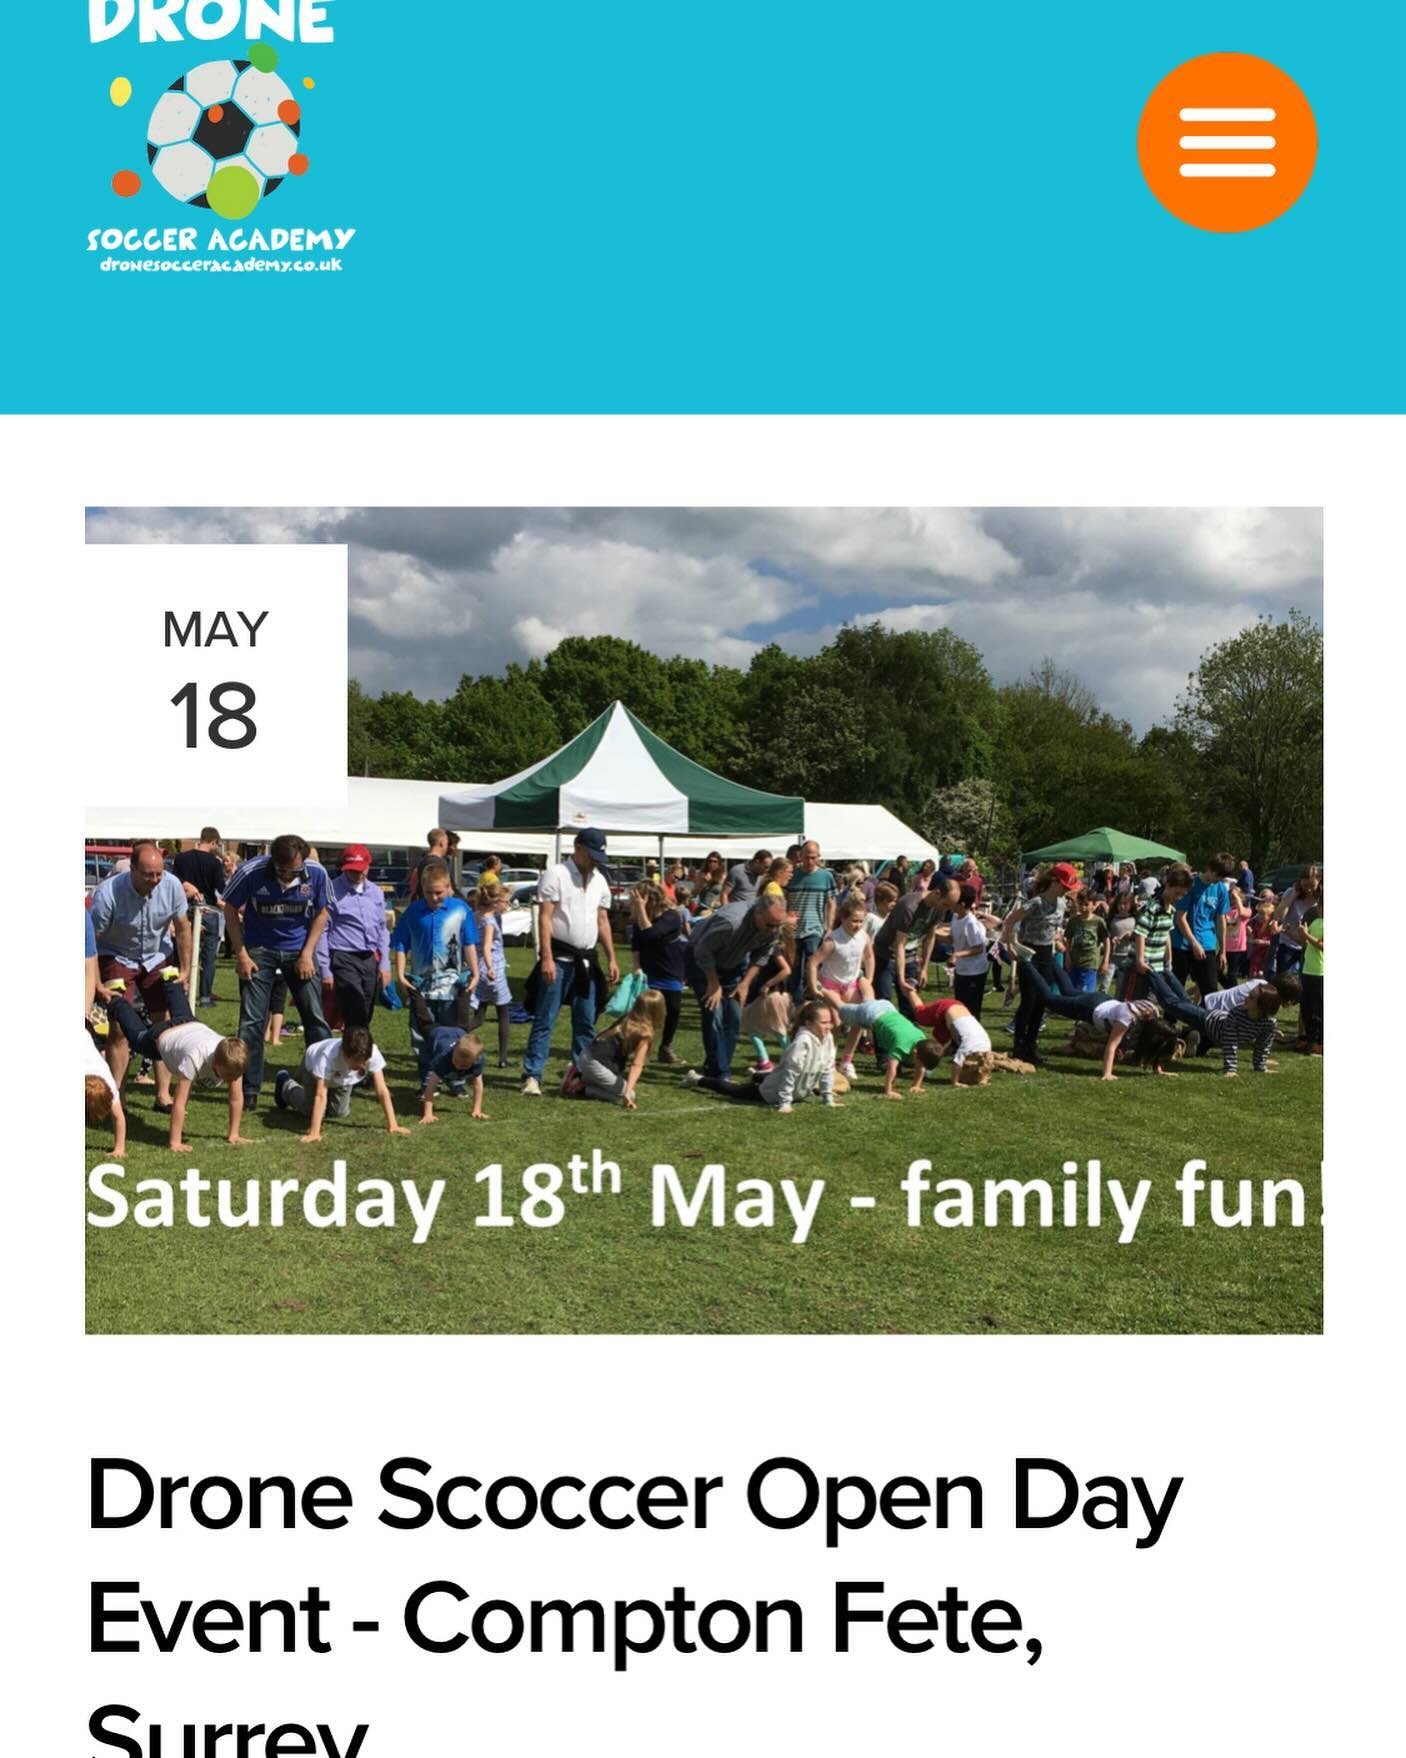 We&rsquo;re in Compton this Saturday! Come and try drone soccer. Check our website for full details. See you there! #dronesoccer #dronesocceracademy#playdronesoccer#ukdronesoccer #dronesoccerbeginners